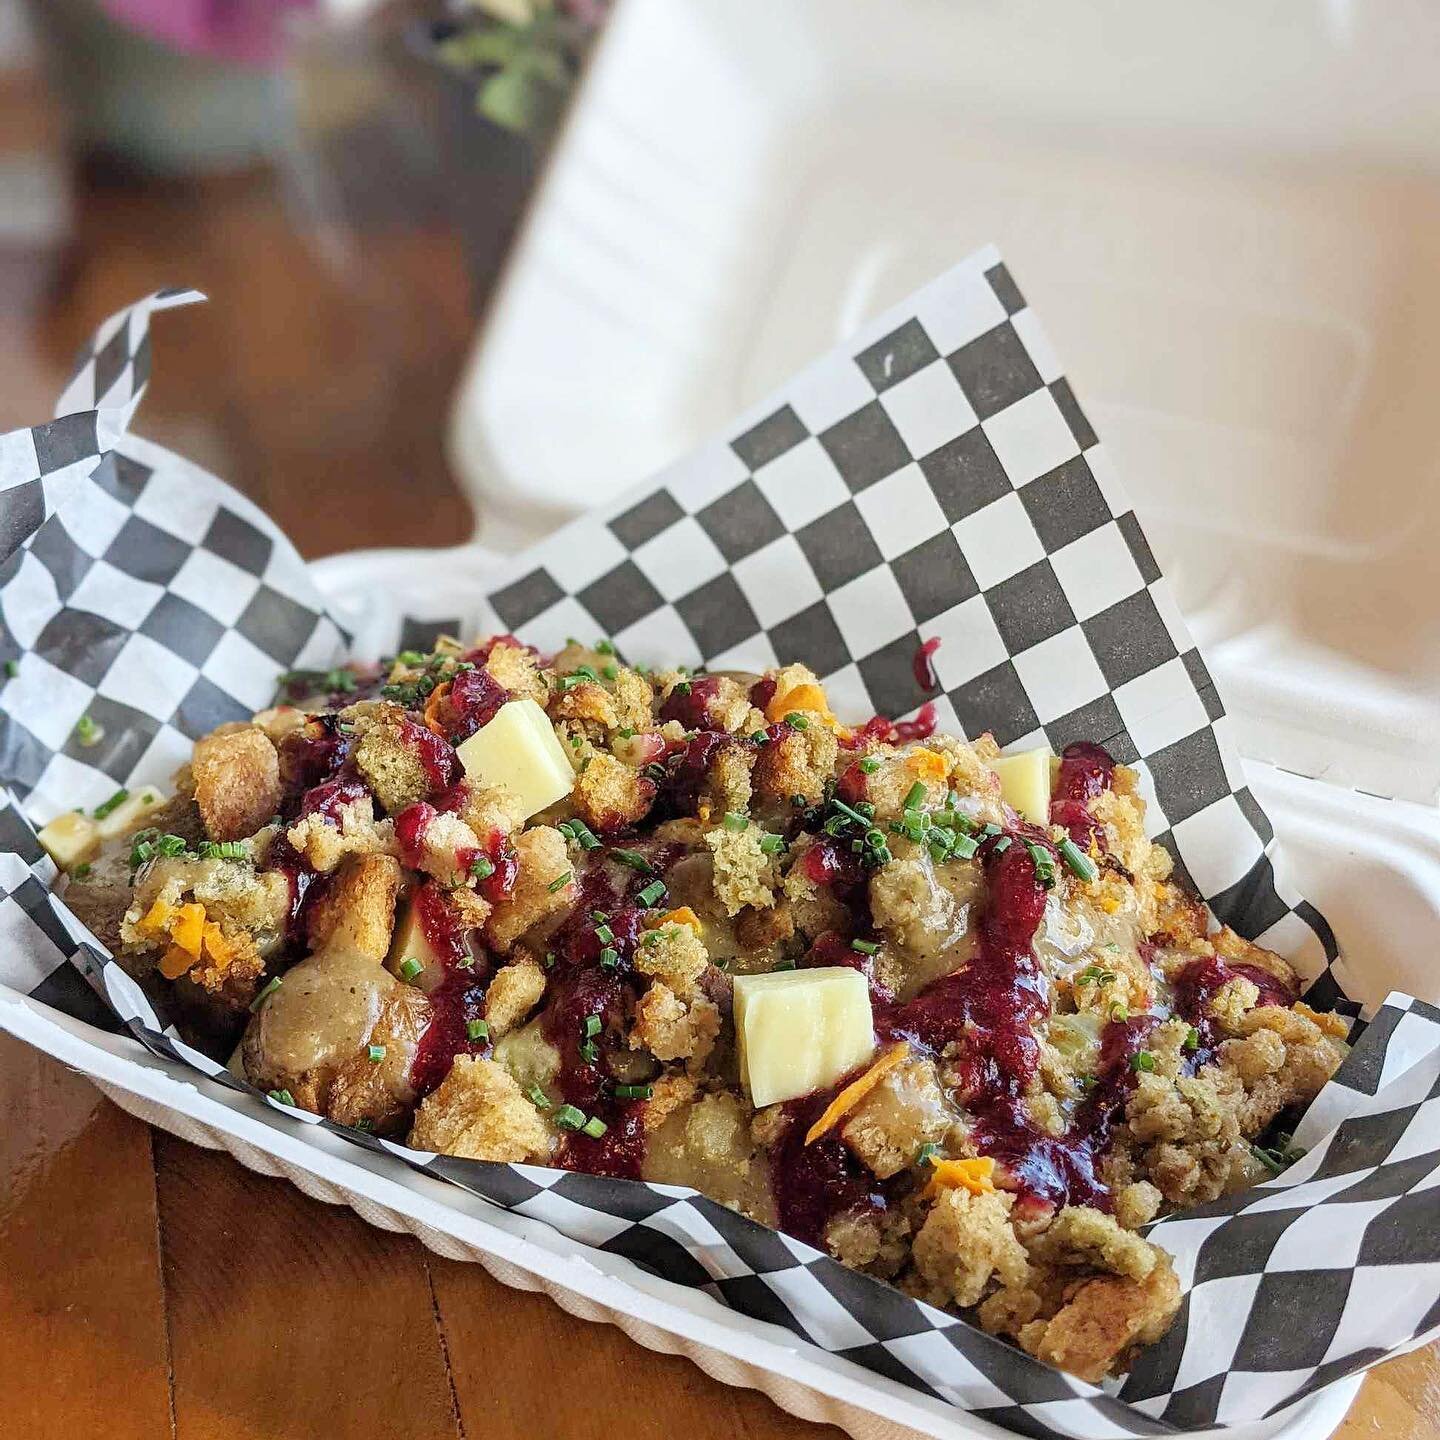 If you didn&rsquo;t know, now you know! Festive Smashed Potato Poutine is back for the WHOLE month of December. It&rsquo;s now our Tradition 🎉